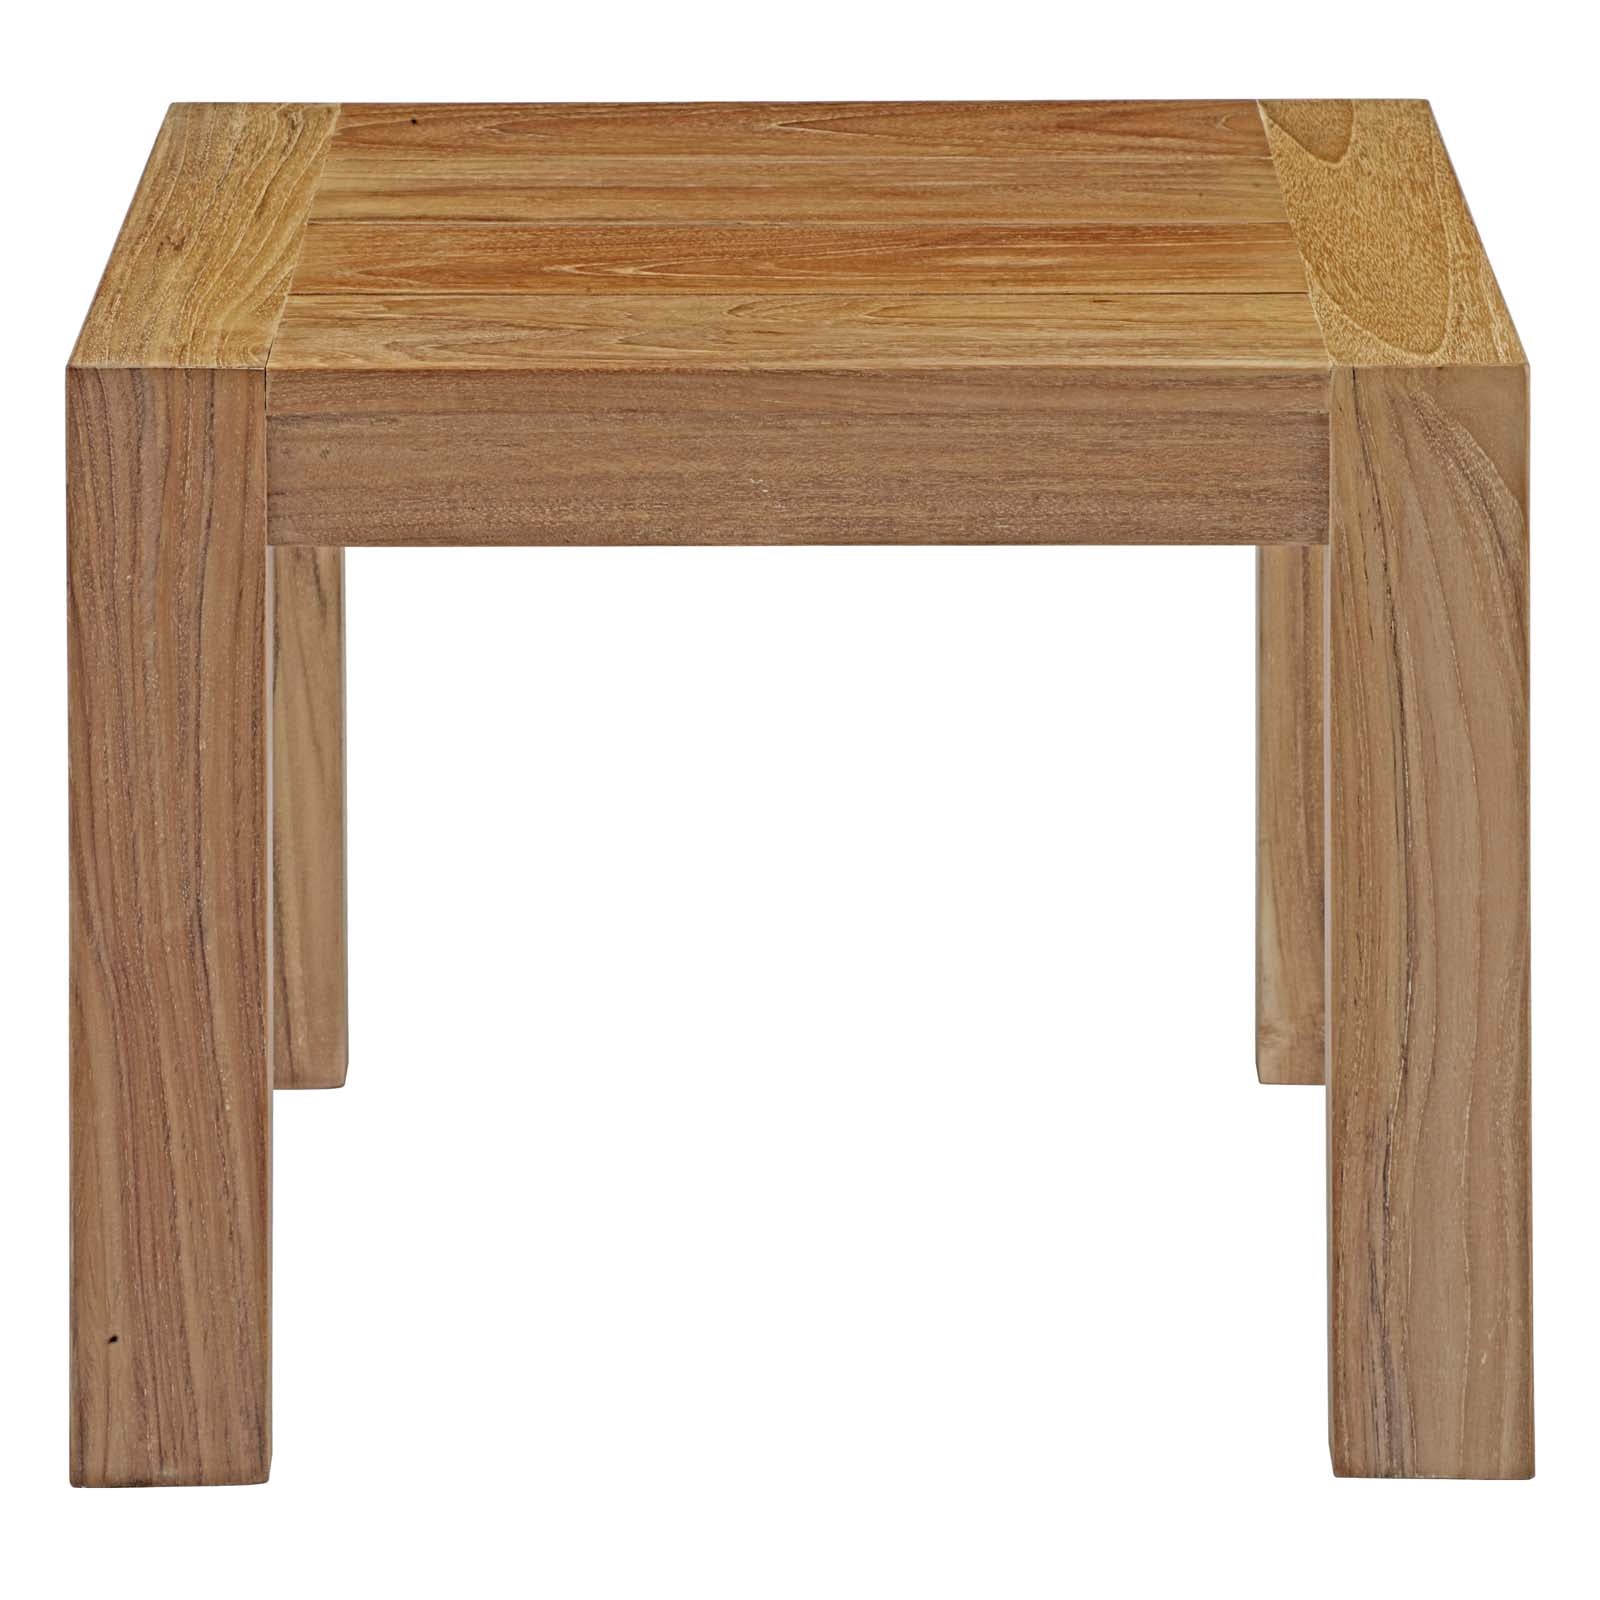 Upland Outdoor Patio Wood Side Table - East Shore Modern Home Furnishings